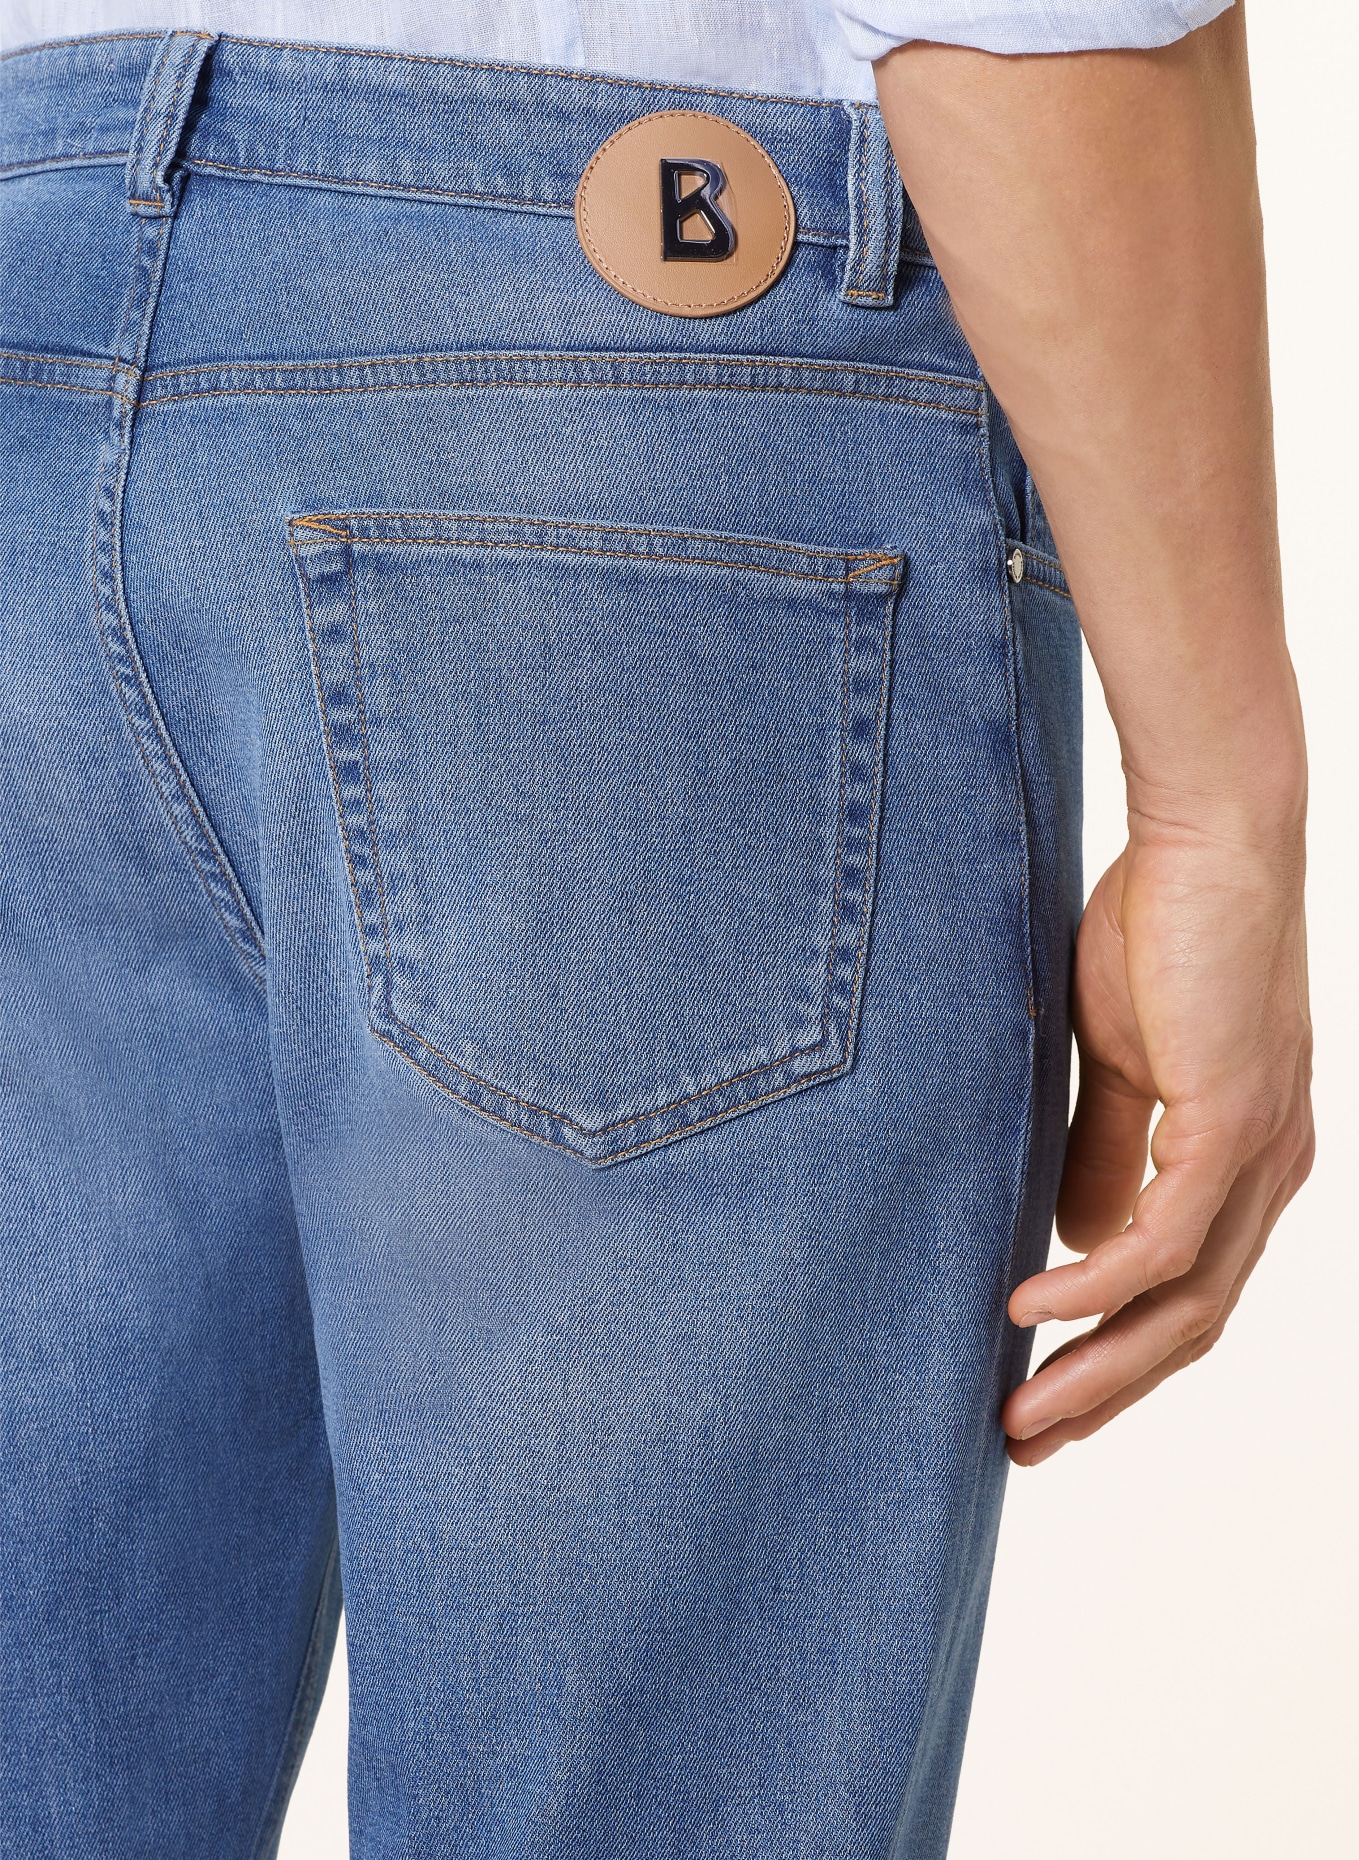 BOGNER Jeans BRIAN Tapered Fit, Farbe: 414 smokey blue (Bild 6)